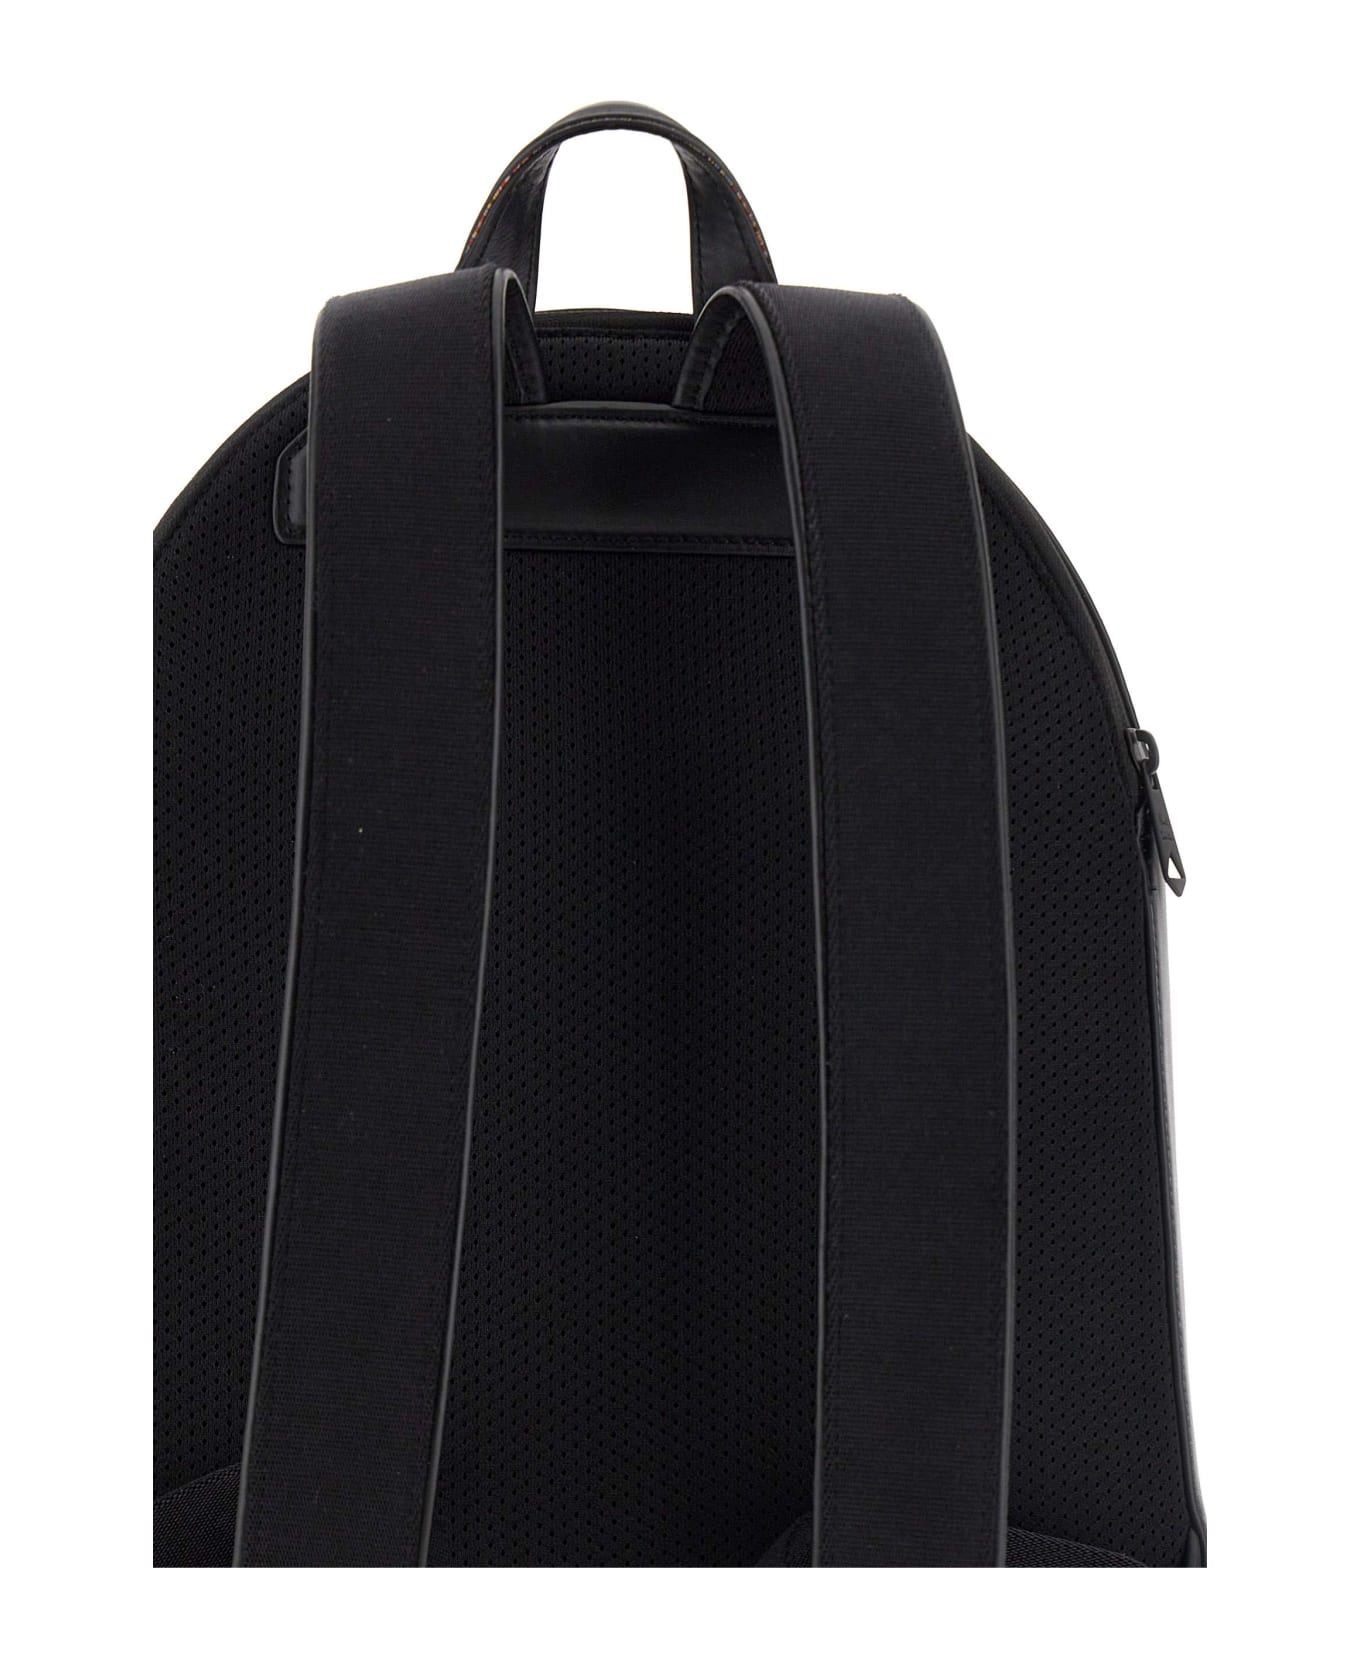 Paul Smith Leather Backpack - BLACK